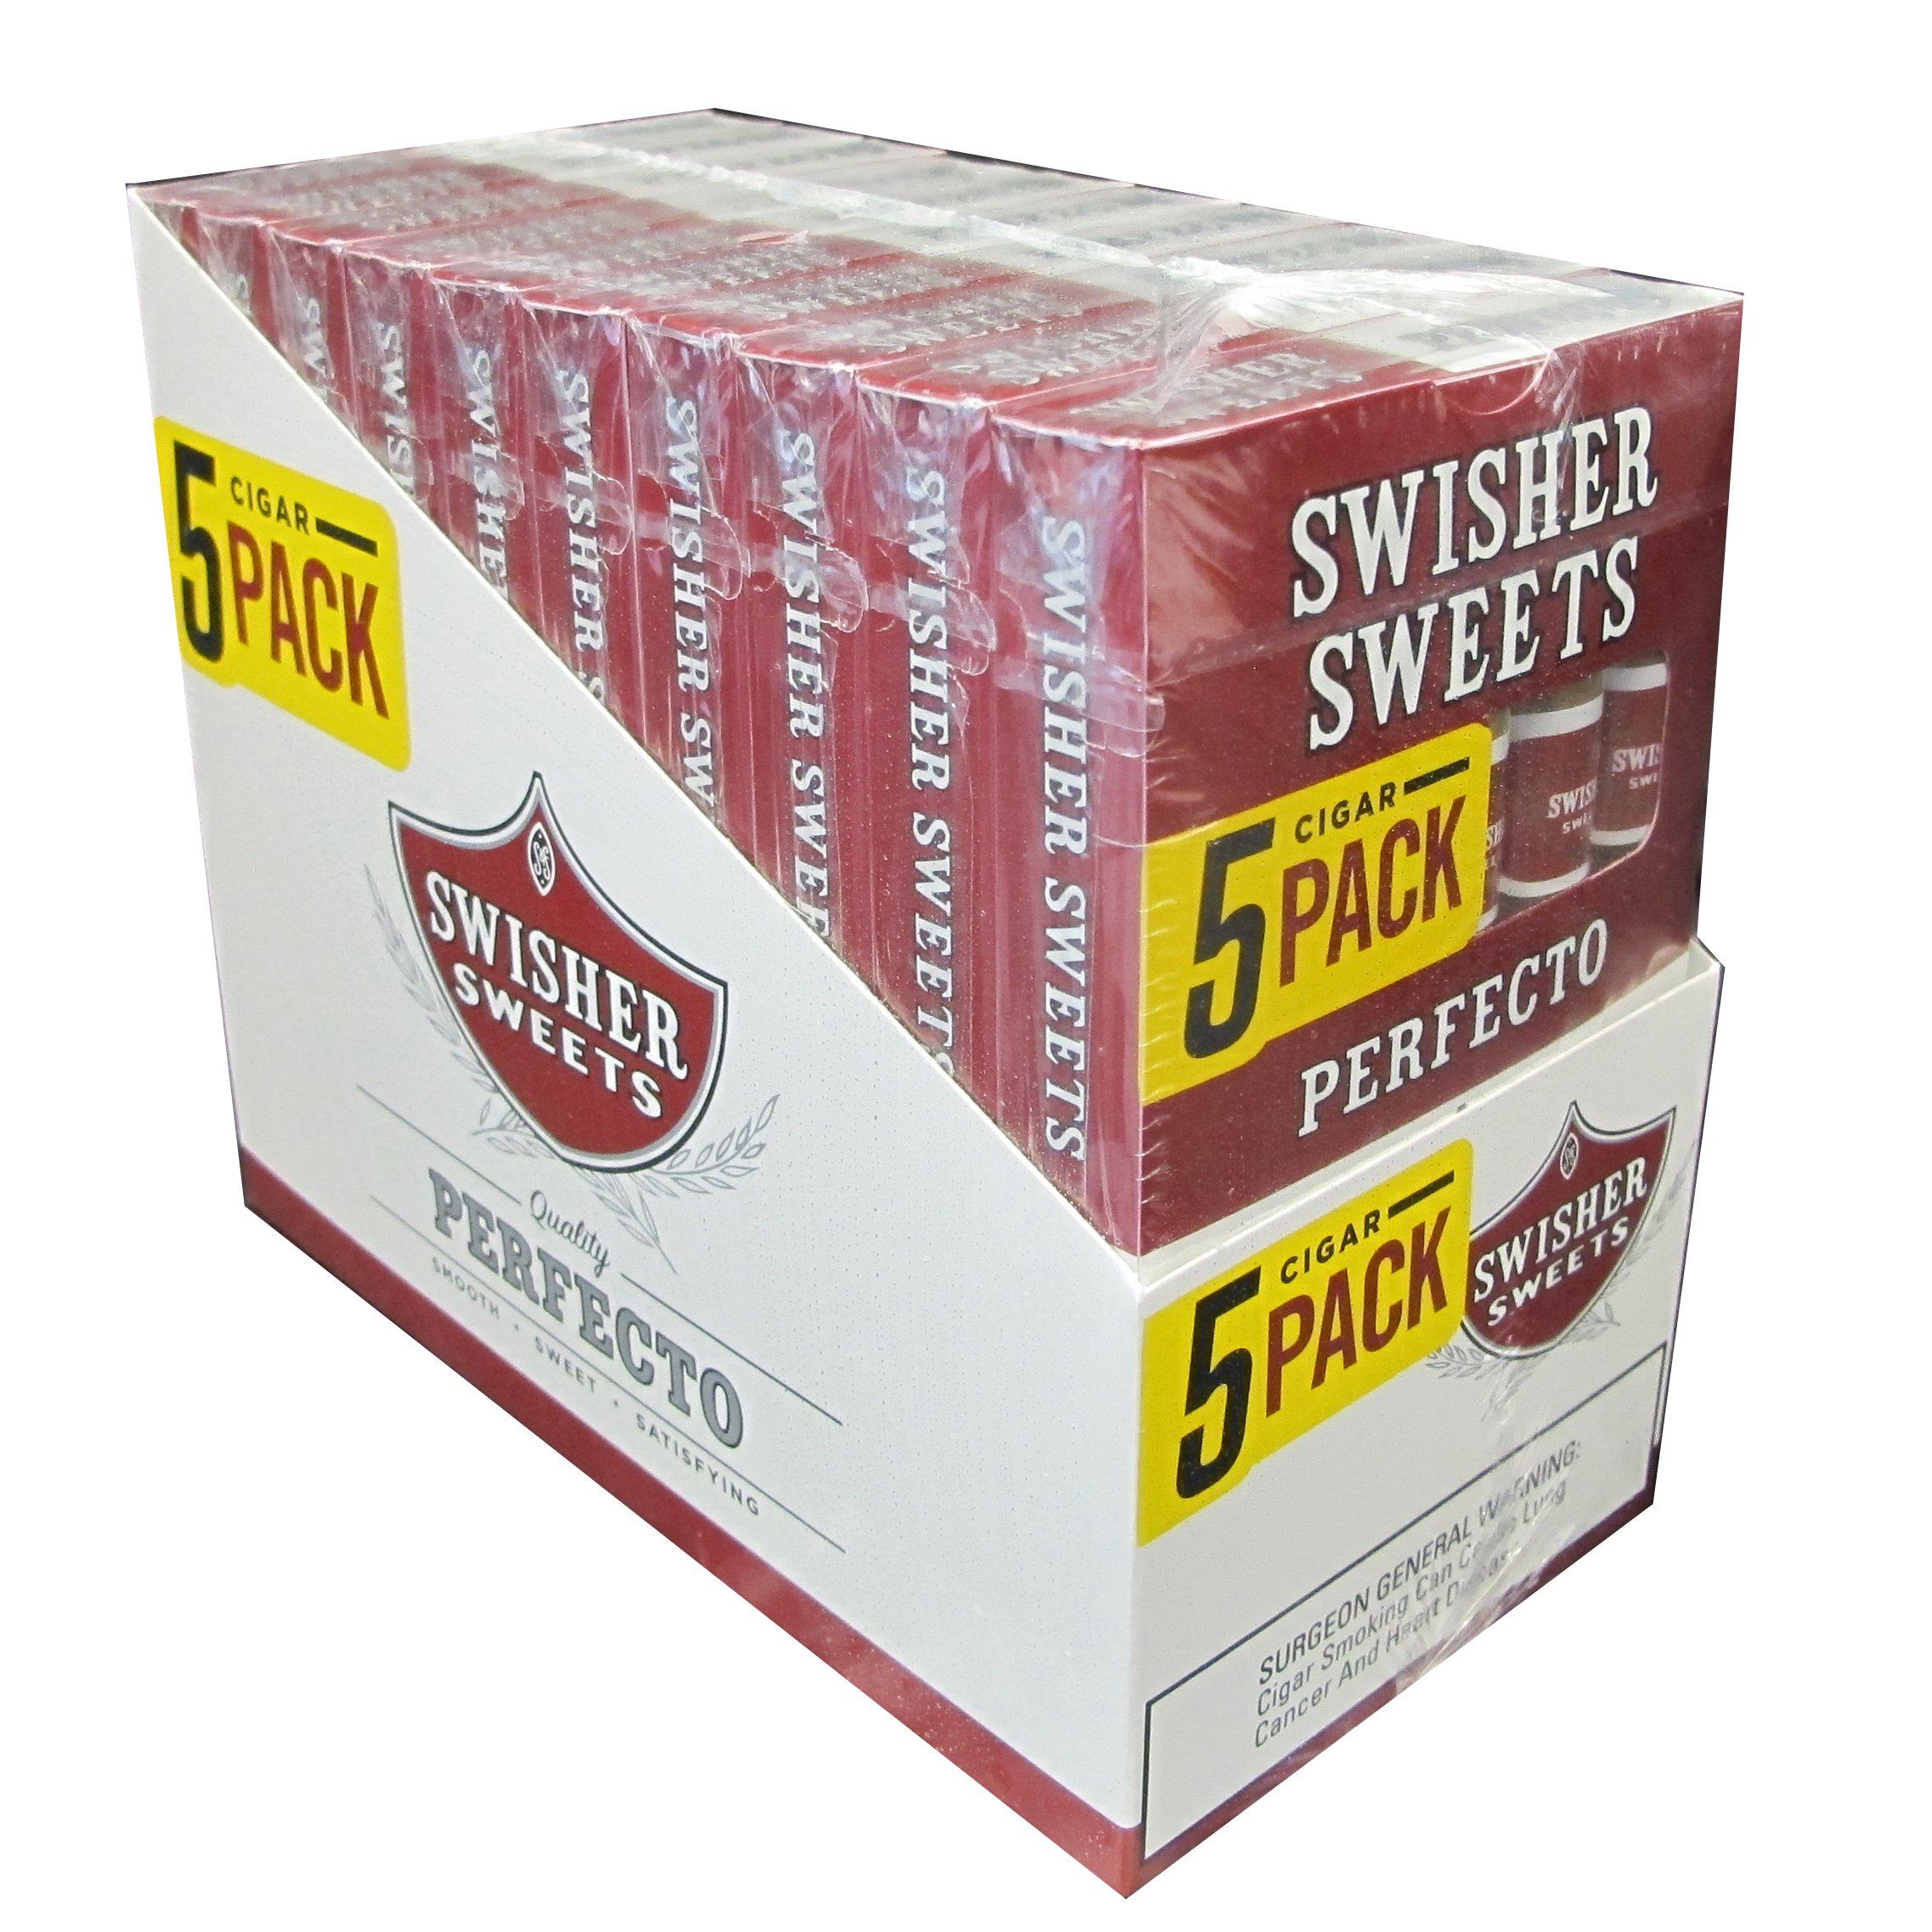 Swisher Sweets Cigarillos Twin Pack